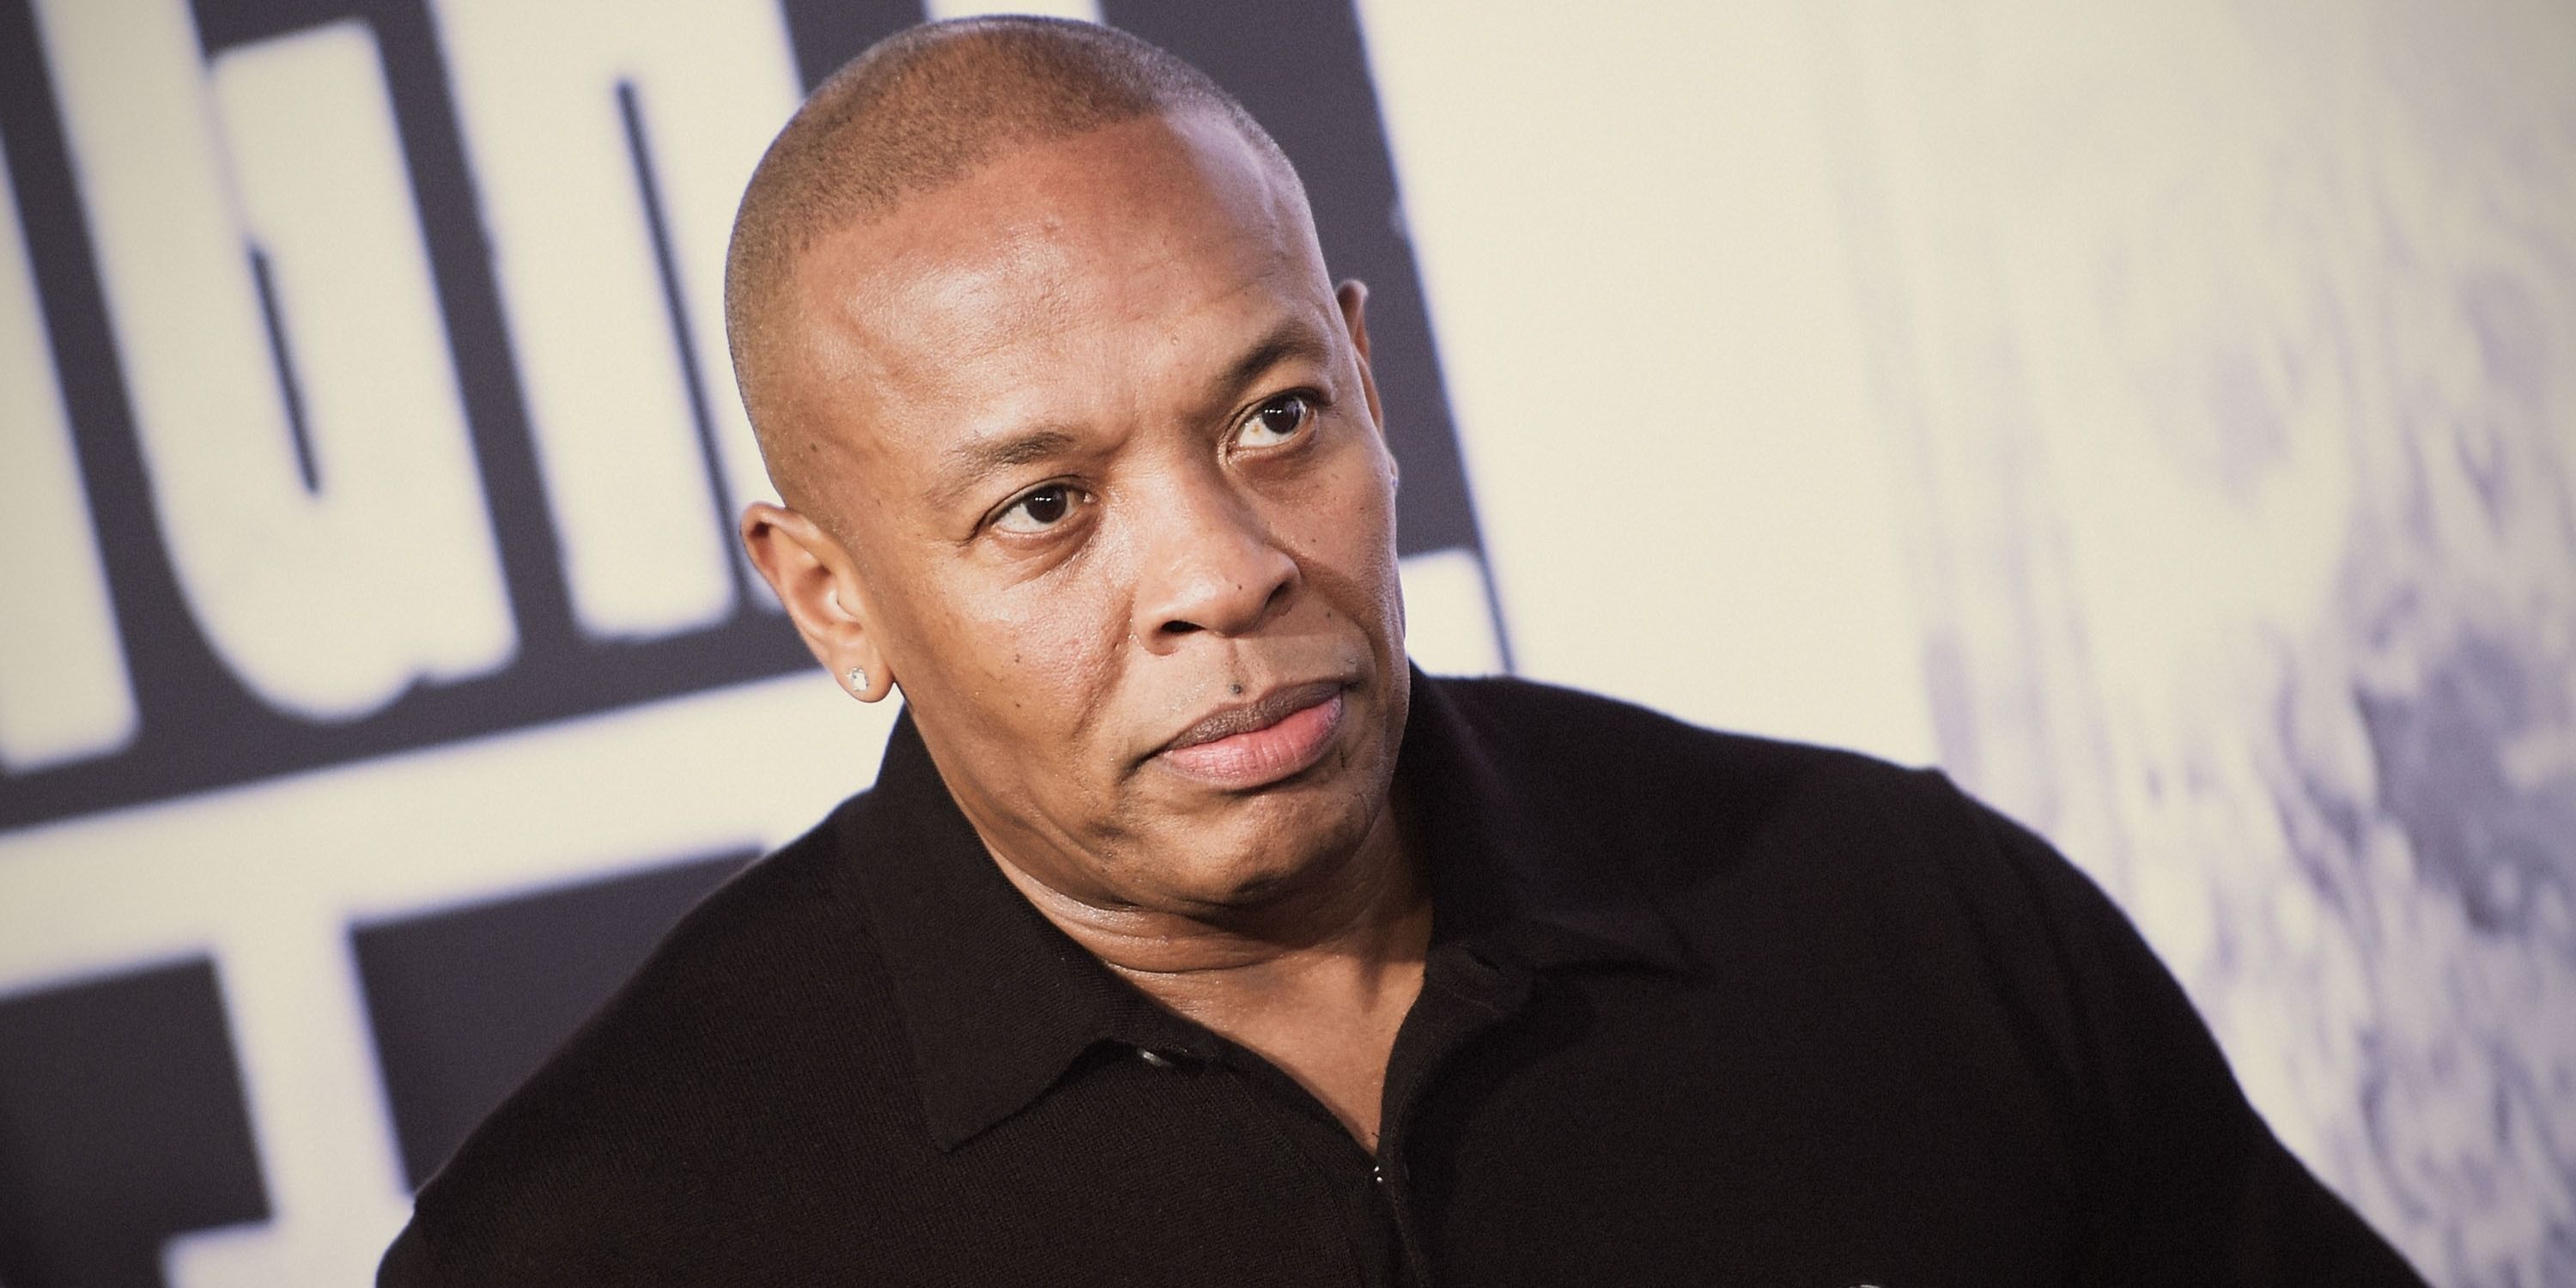 dr-dre-apologizes-to-the-women-ive-hurt-after-straight-outta-compton-controversy.jpg